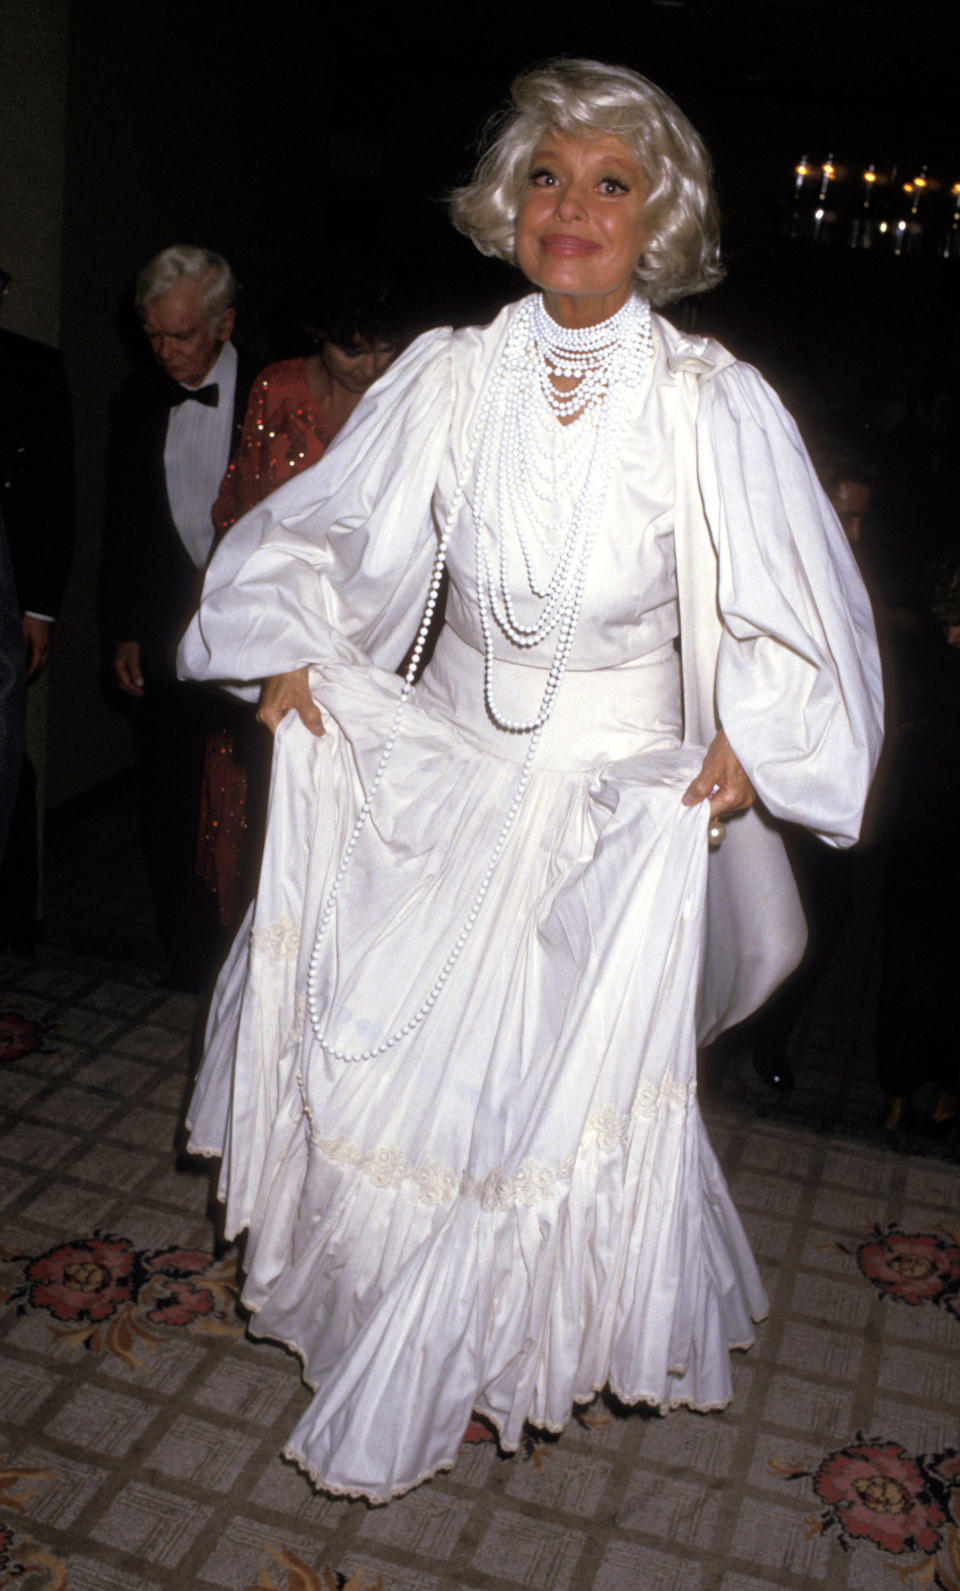 The actress attends the 1987 St. Jude Gala at Century Plaza Hotel in Century City, California.